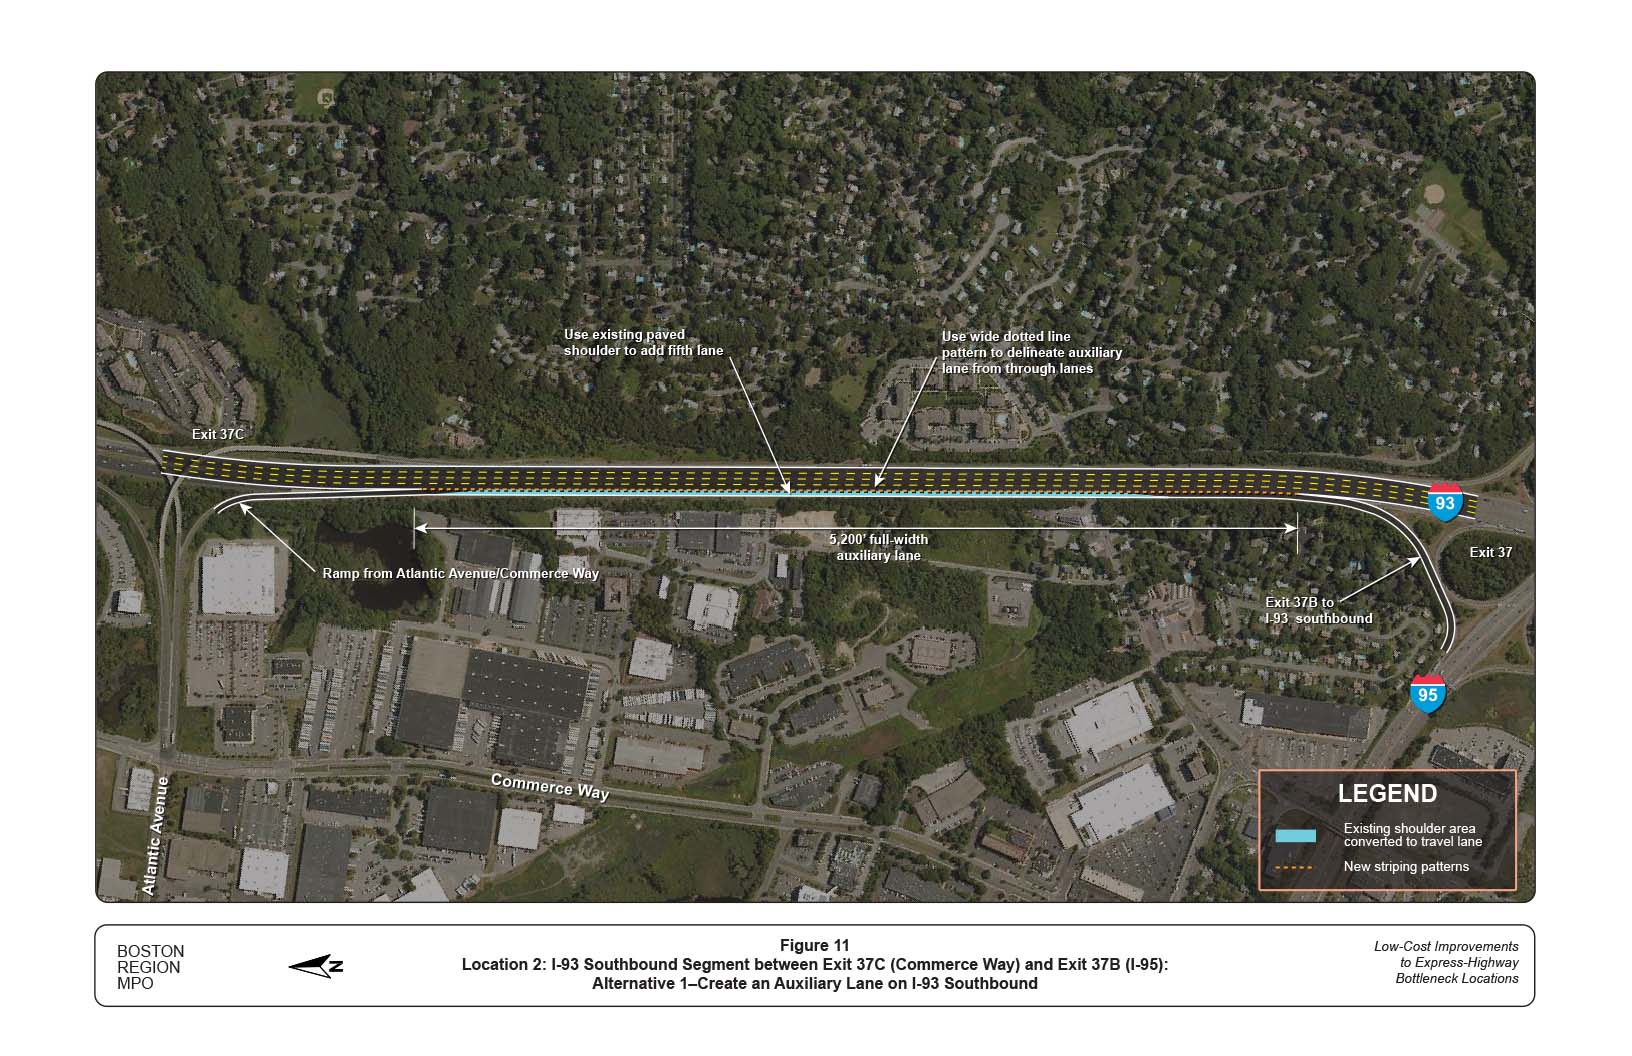 FIGURE 11. Location 2: I-93 Southbound Segment between Exit 37C (Commerce Way) and Exit 37B (I-95): Alternative 1–Create an Auxiliary Lane on I-93 Southbound
Figure 11 shows the creation of an auxiliary lane using an existing paved shoulder to add a fifth lane on I-93 Southbound between Exit 37C and Exit 37B.
